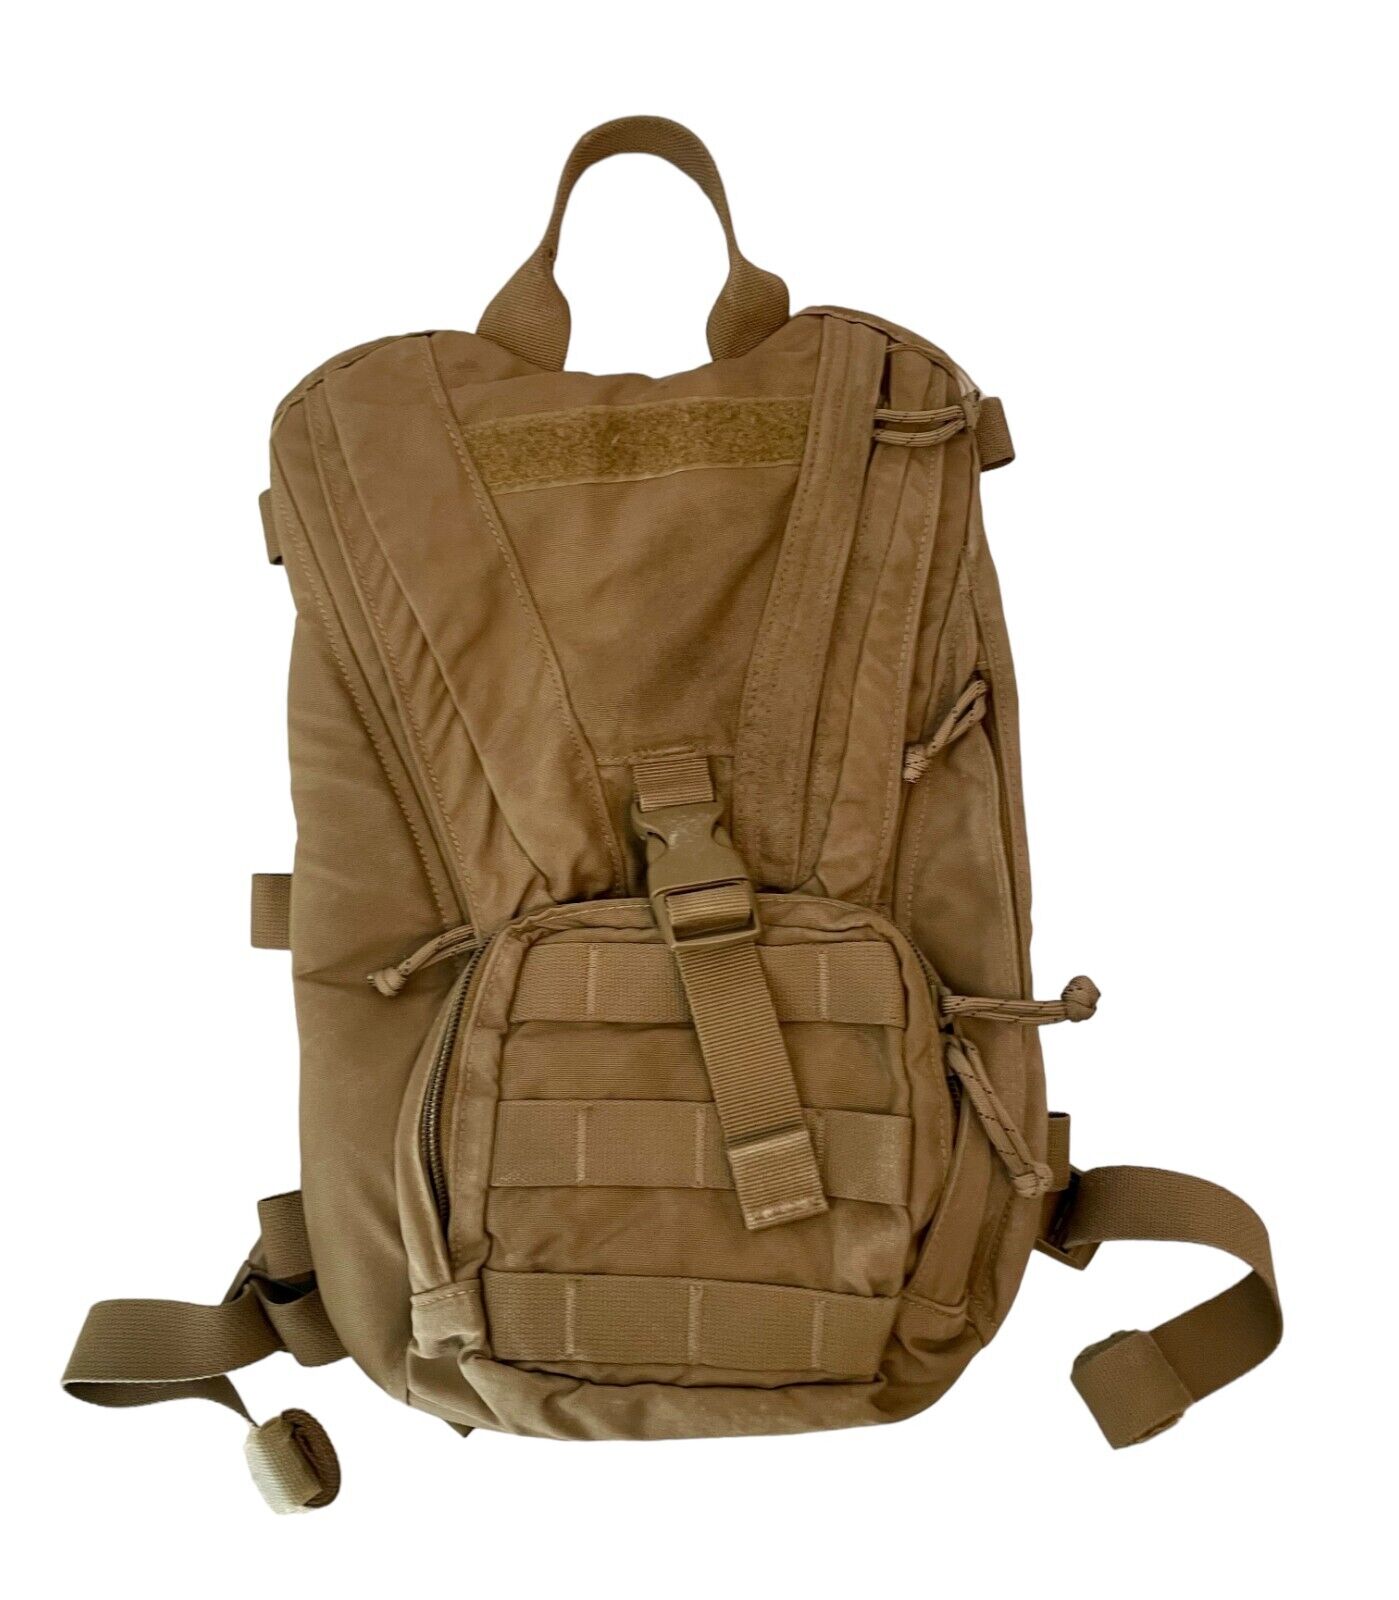 USMC Issue Coyote FILBE HYDRATION PACK Carrier Backpack (No Bladder) VGC